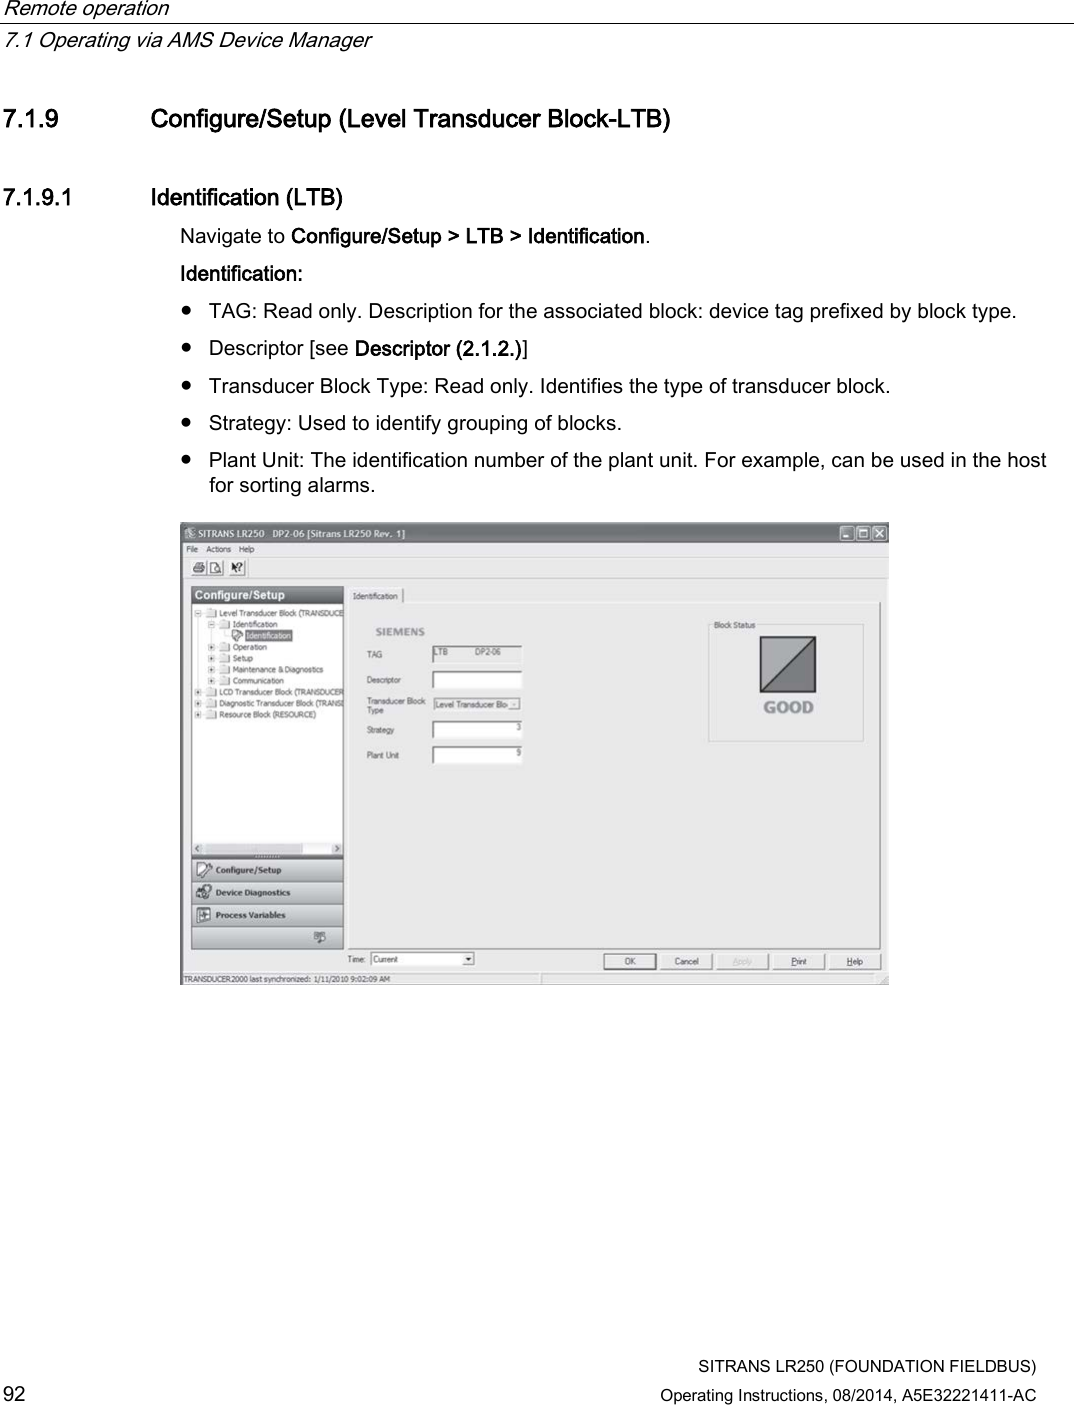 Remote operation   7.1 Operating via AMS Device Manager  SITRANS LR250 (FOUNDATION FIELDBUS) 92 Operating Instructions, 08/2014, A5E32221411-AC 7.1.9 Configure/Setup (Level Transducer Block-LTB) 7.1.9.1 Identification (LTB) Navigate to Configure/Setup &gt; LTB &gt; Identification. Identification: ● TAG: Read only. Description for the associated block: device tag prefixed by block type. ● Descriptor [see Descriptor (2.1.2.)] ● Transducer Block Type: Read only. Identifies the type of transducer block. ● Strategy: Used to identify grouping of blocks. ● Plant Unit: The identification number of the plant unit. For example, can be used in the host for sorting alarms.  